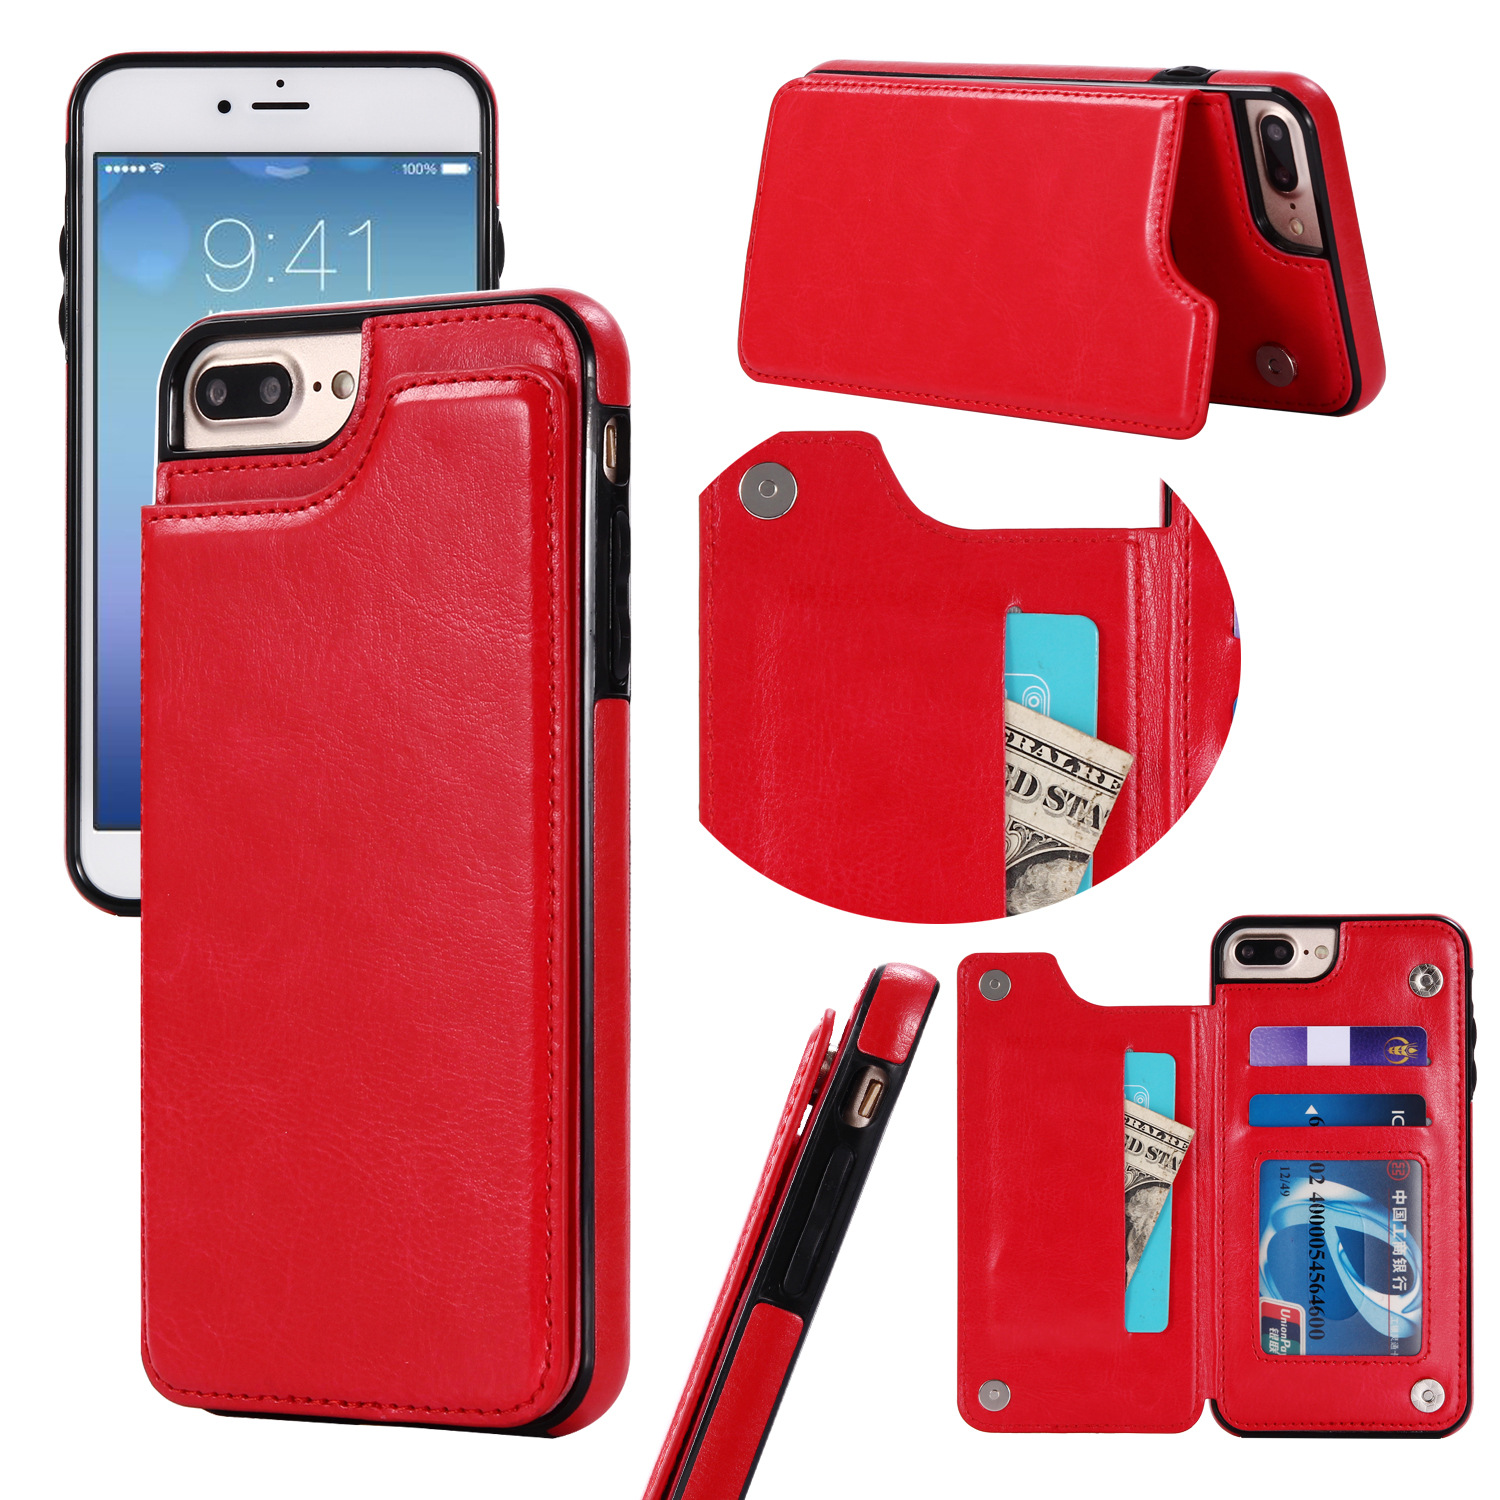 iPhone 8 Plus / 7 Plus Flip BOOK Leather Style Credit Card Case (Red)